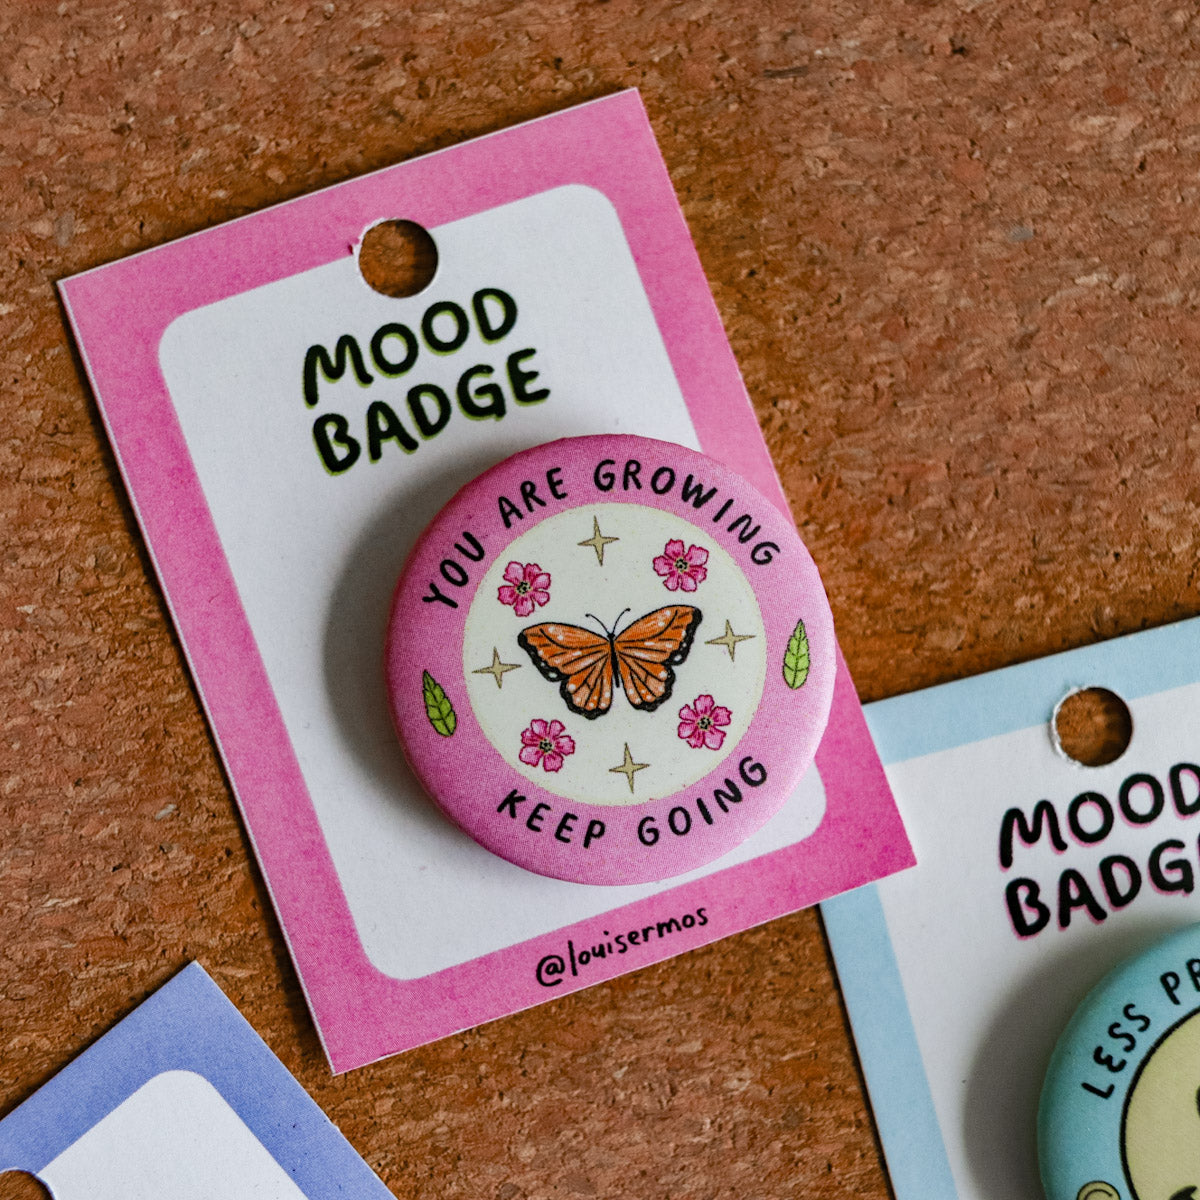 Button Pins by Artsyology – Common Room PH